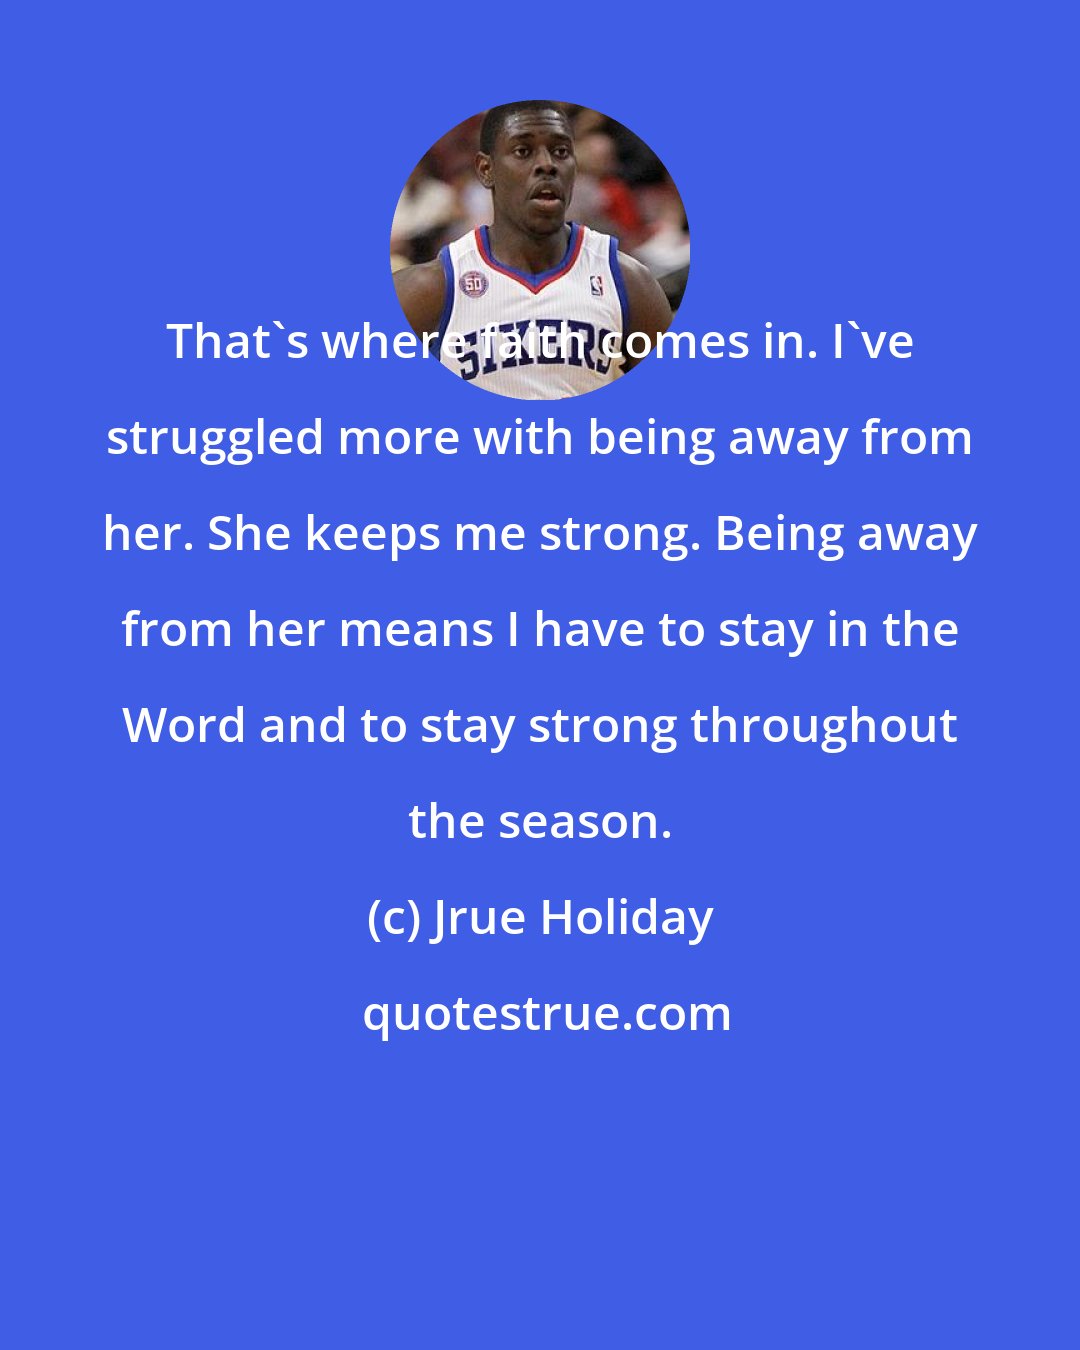 Jrue Holiday: That's where faith comes in. I've struggled more with being away from her. She keeps me strong. Being away from her means I have to stay in the Word and to stay strong throughout the season.